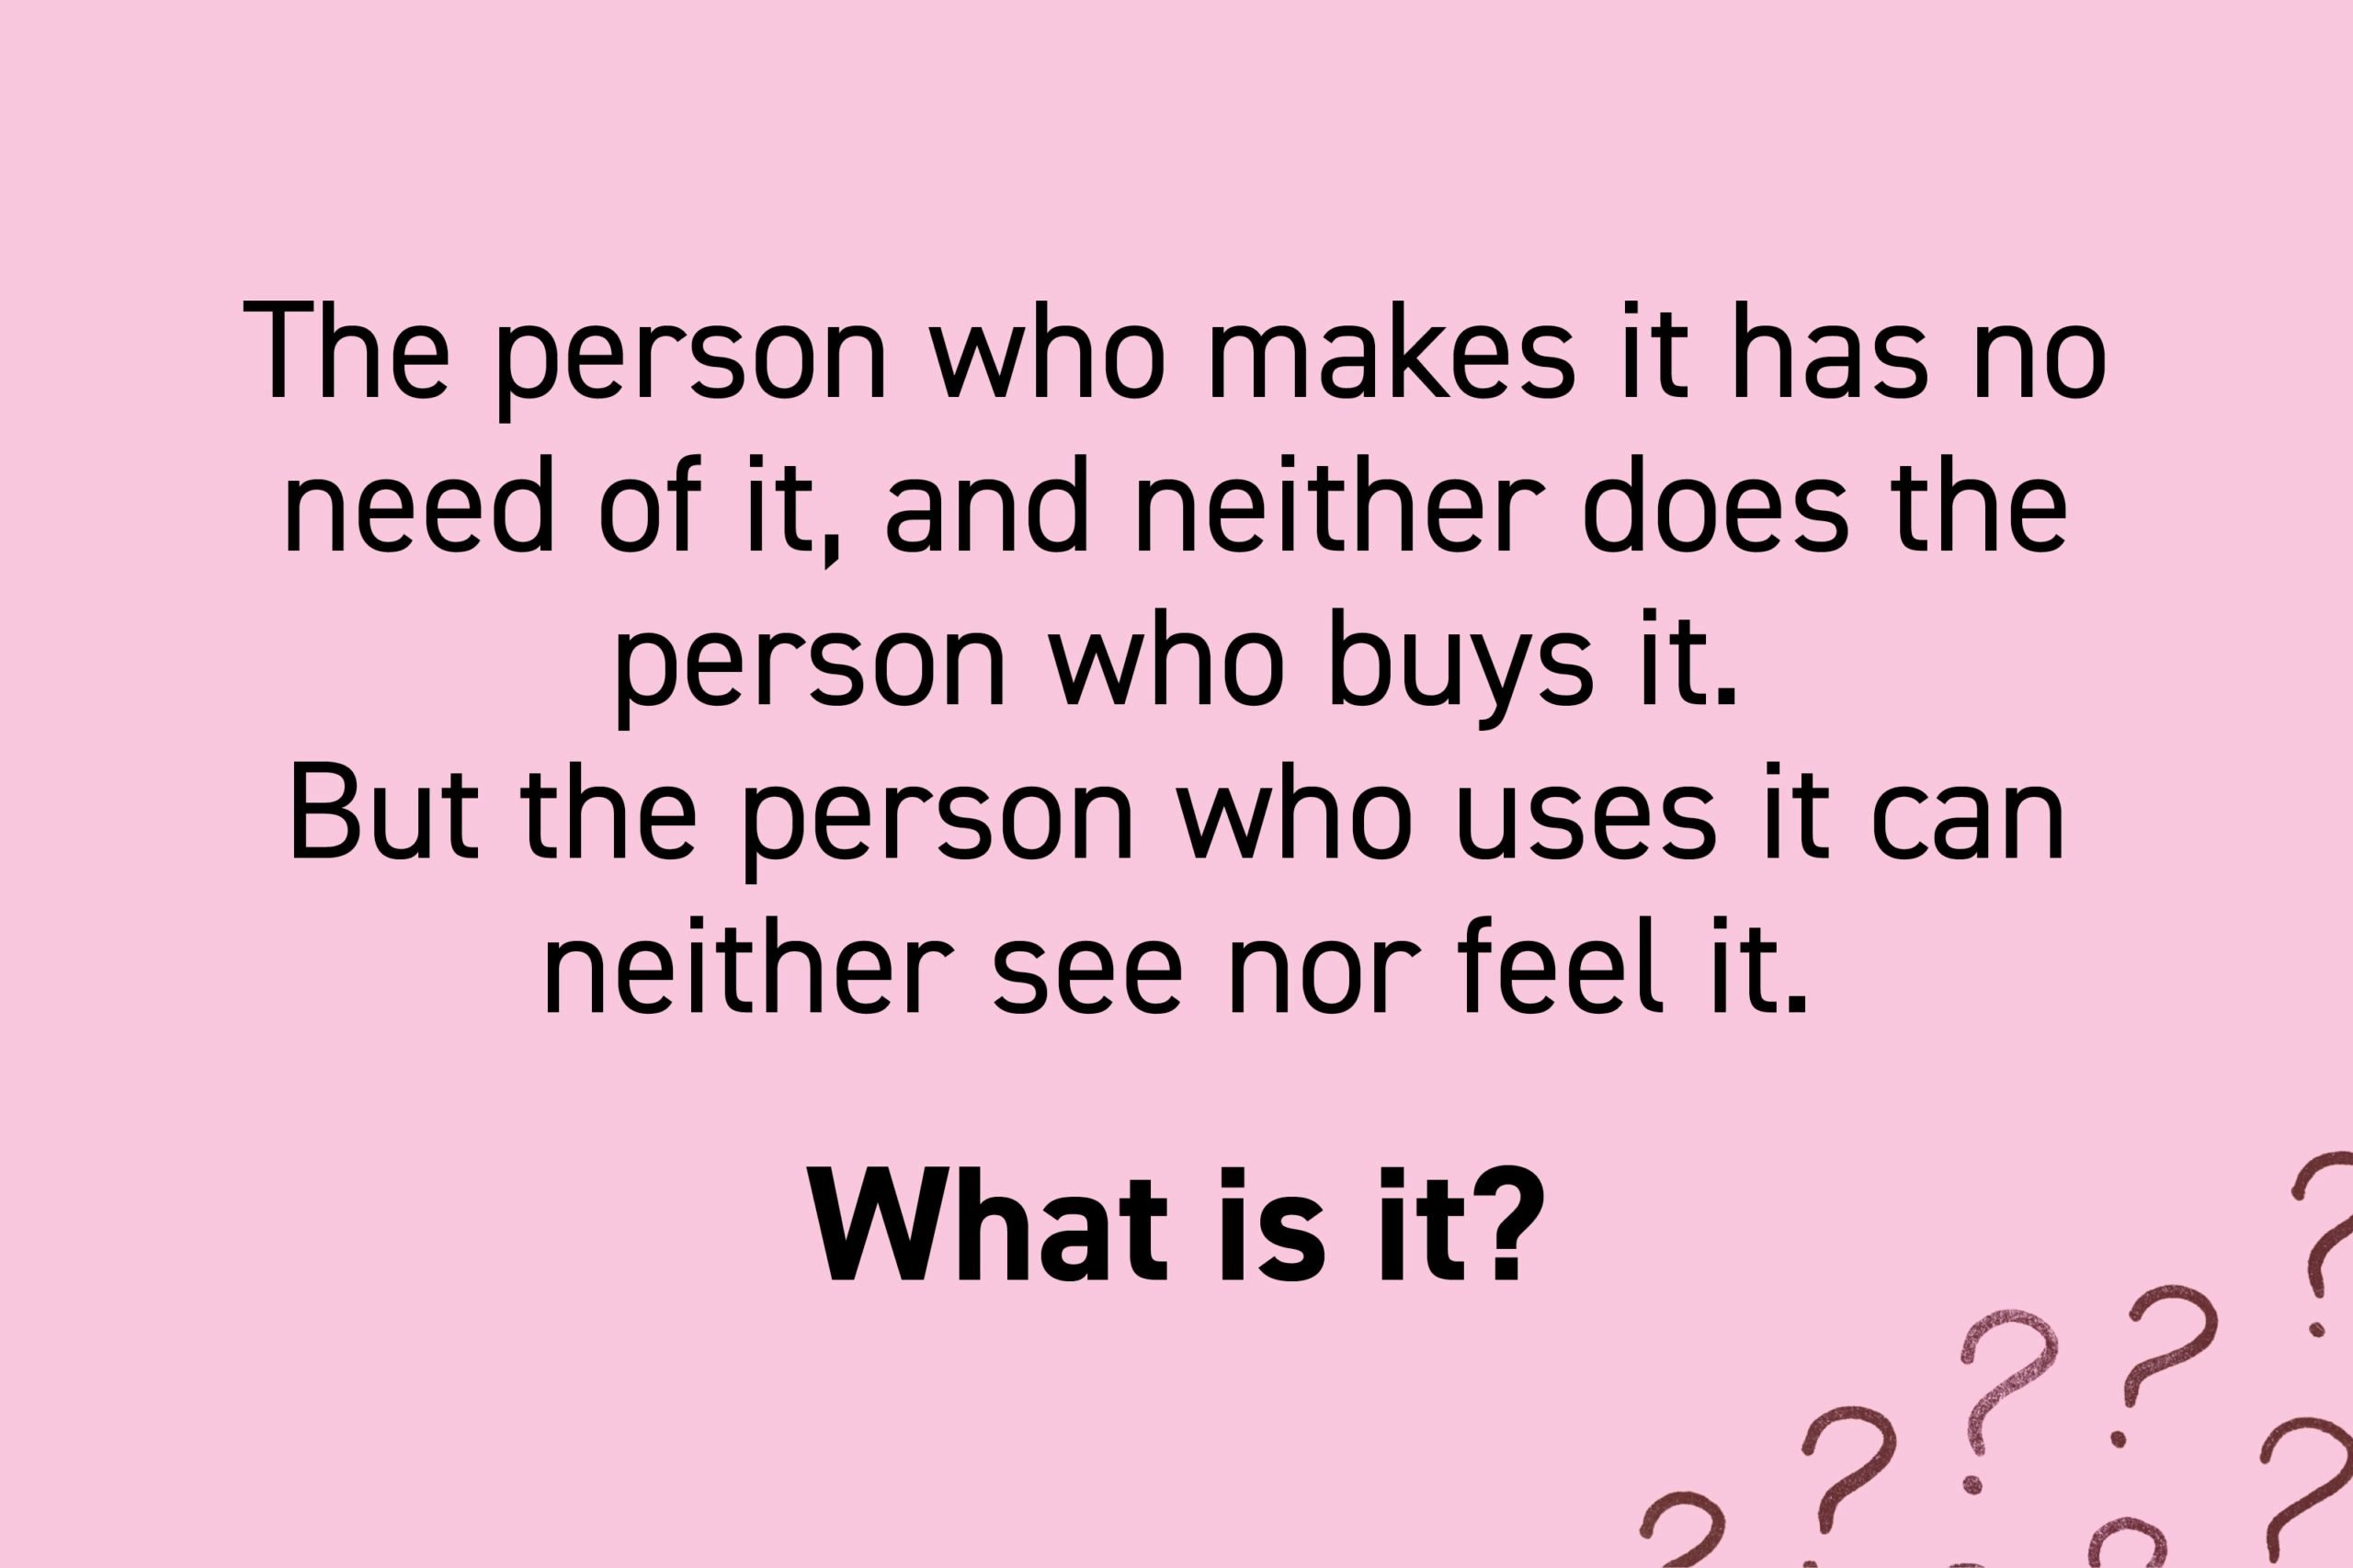 The person who makes it has no need of it, and neither does the person who buys it. But the person who uses it can neither see nor feel it. What is it?